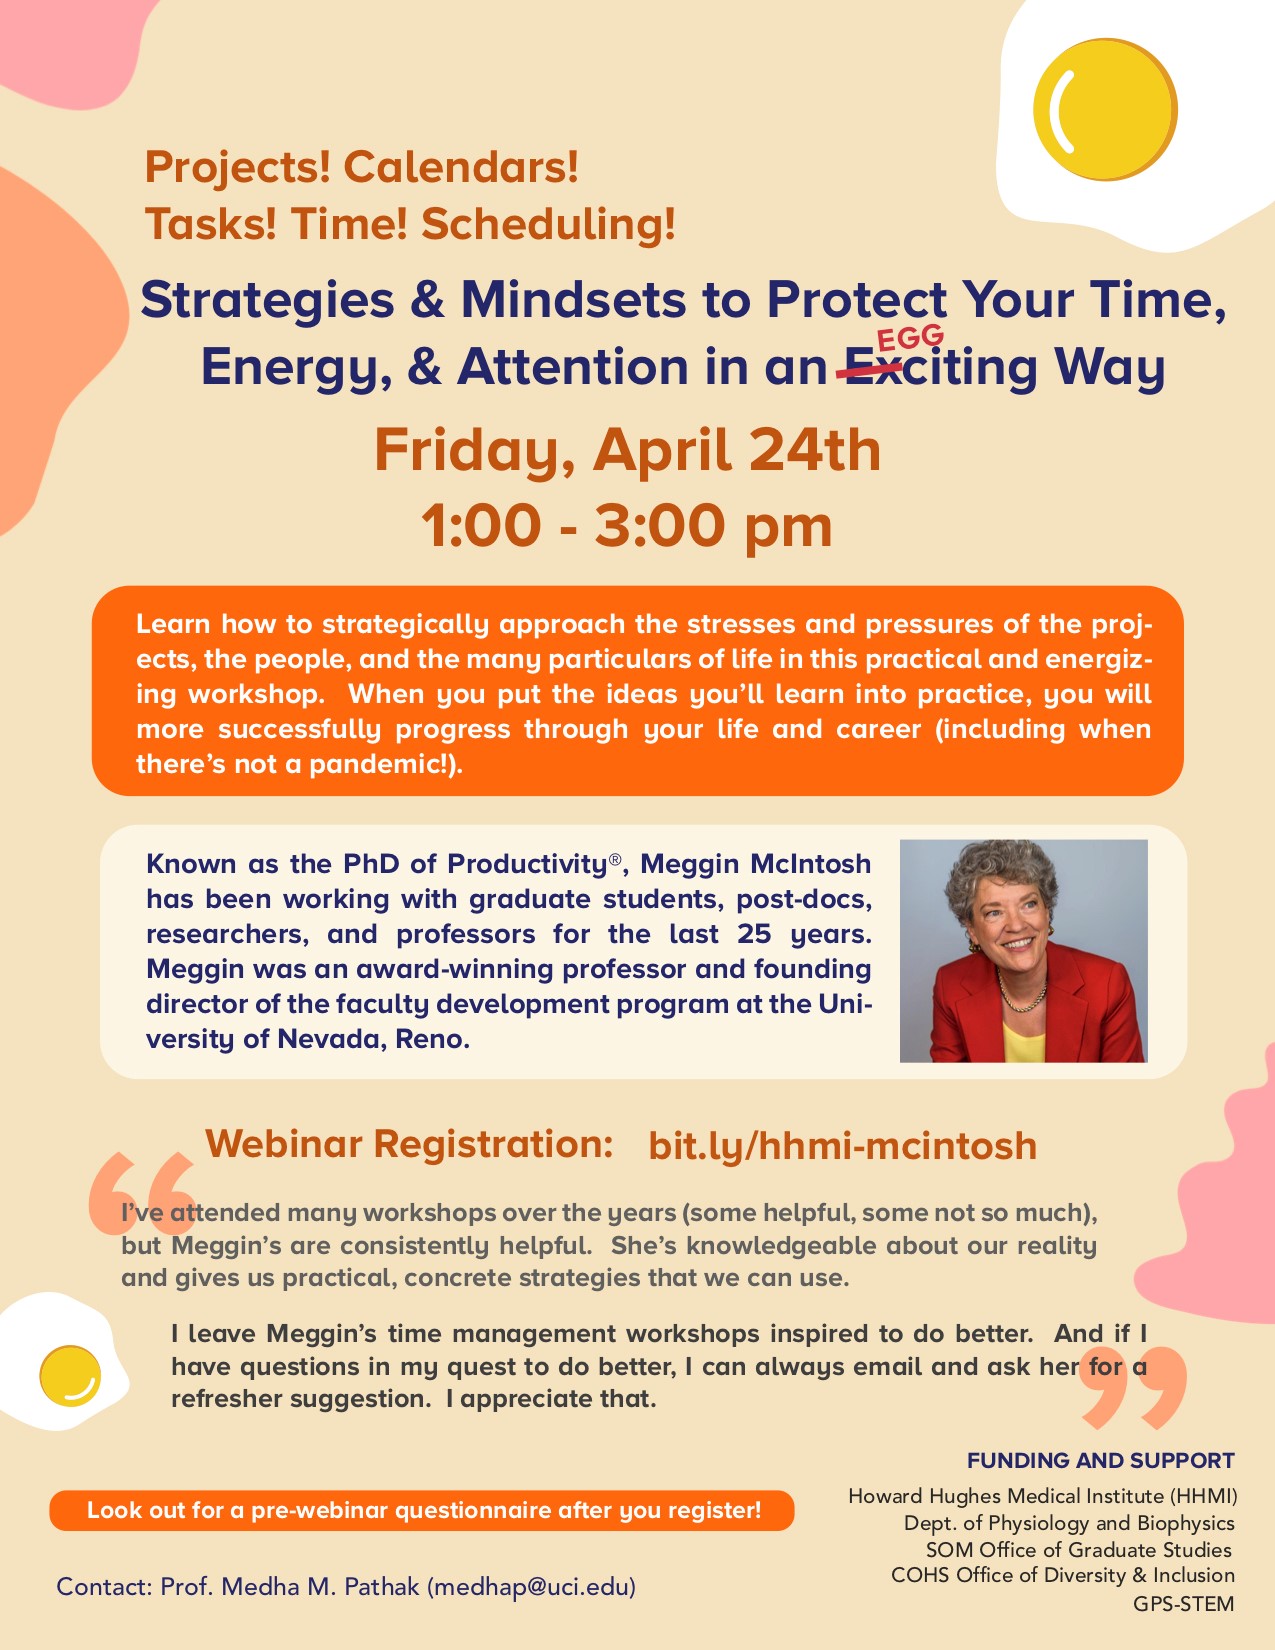 strategies and mindsets to protect your time, energy, and attention in a eggciting way